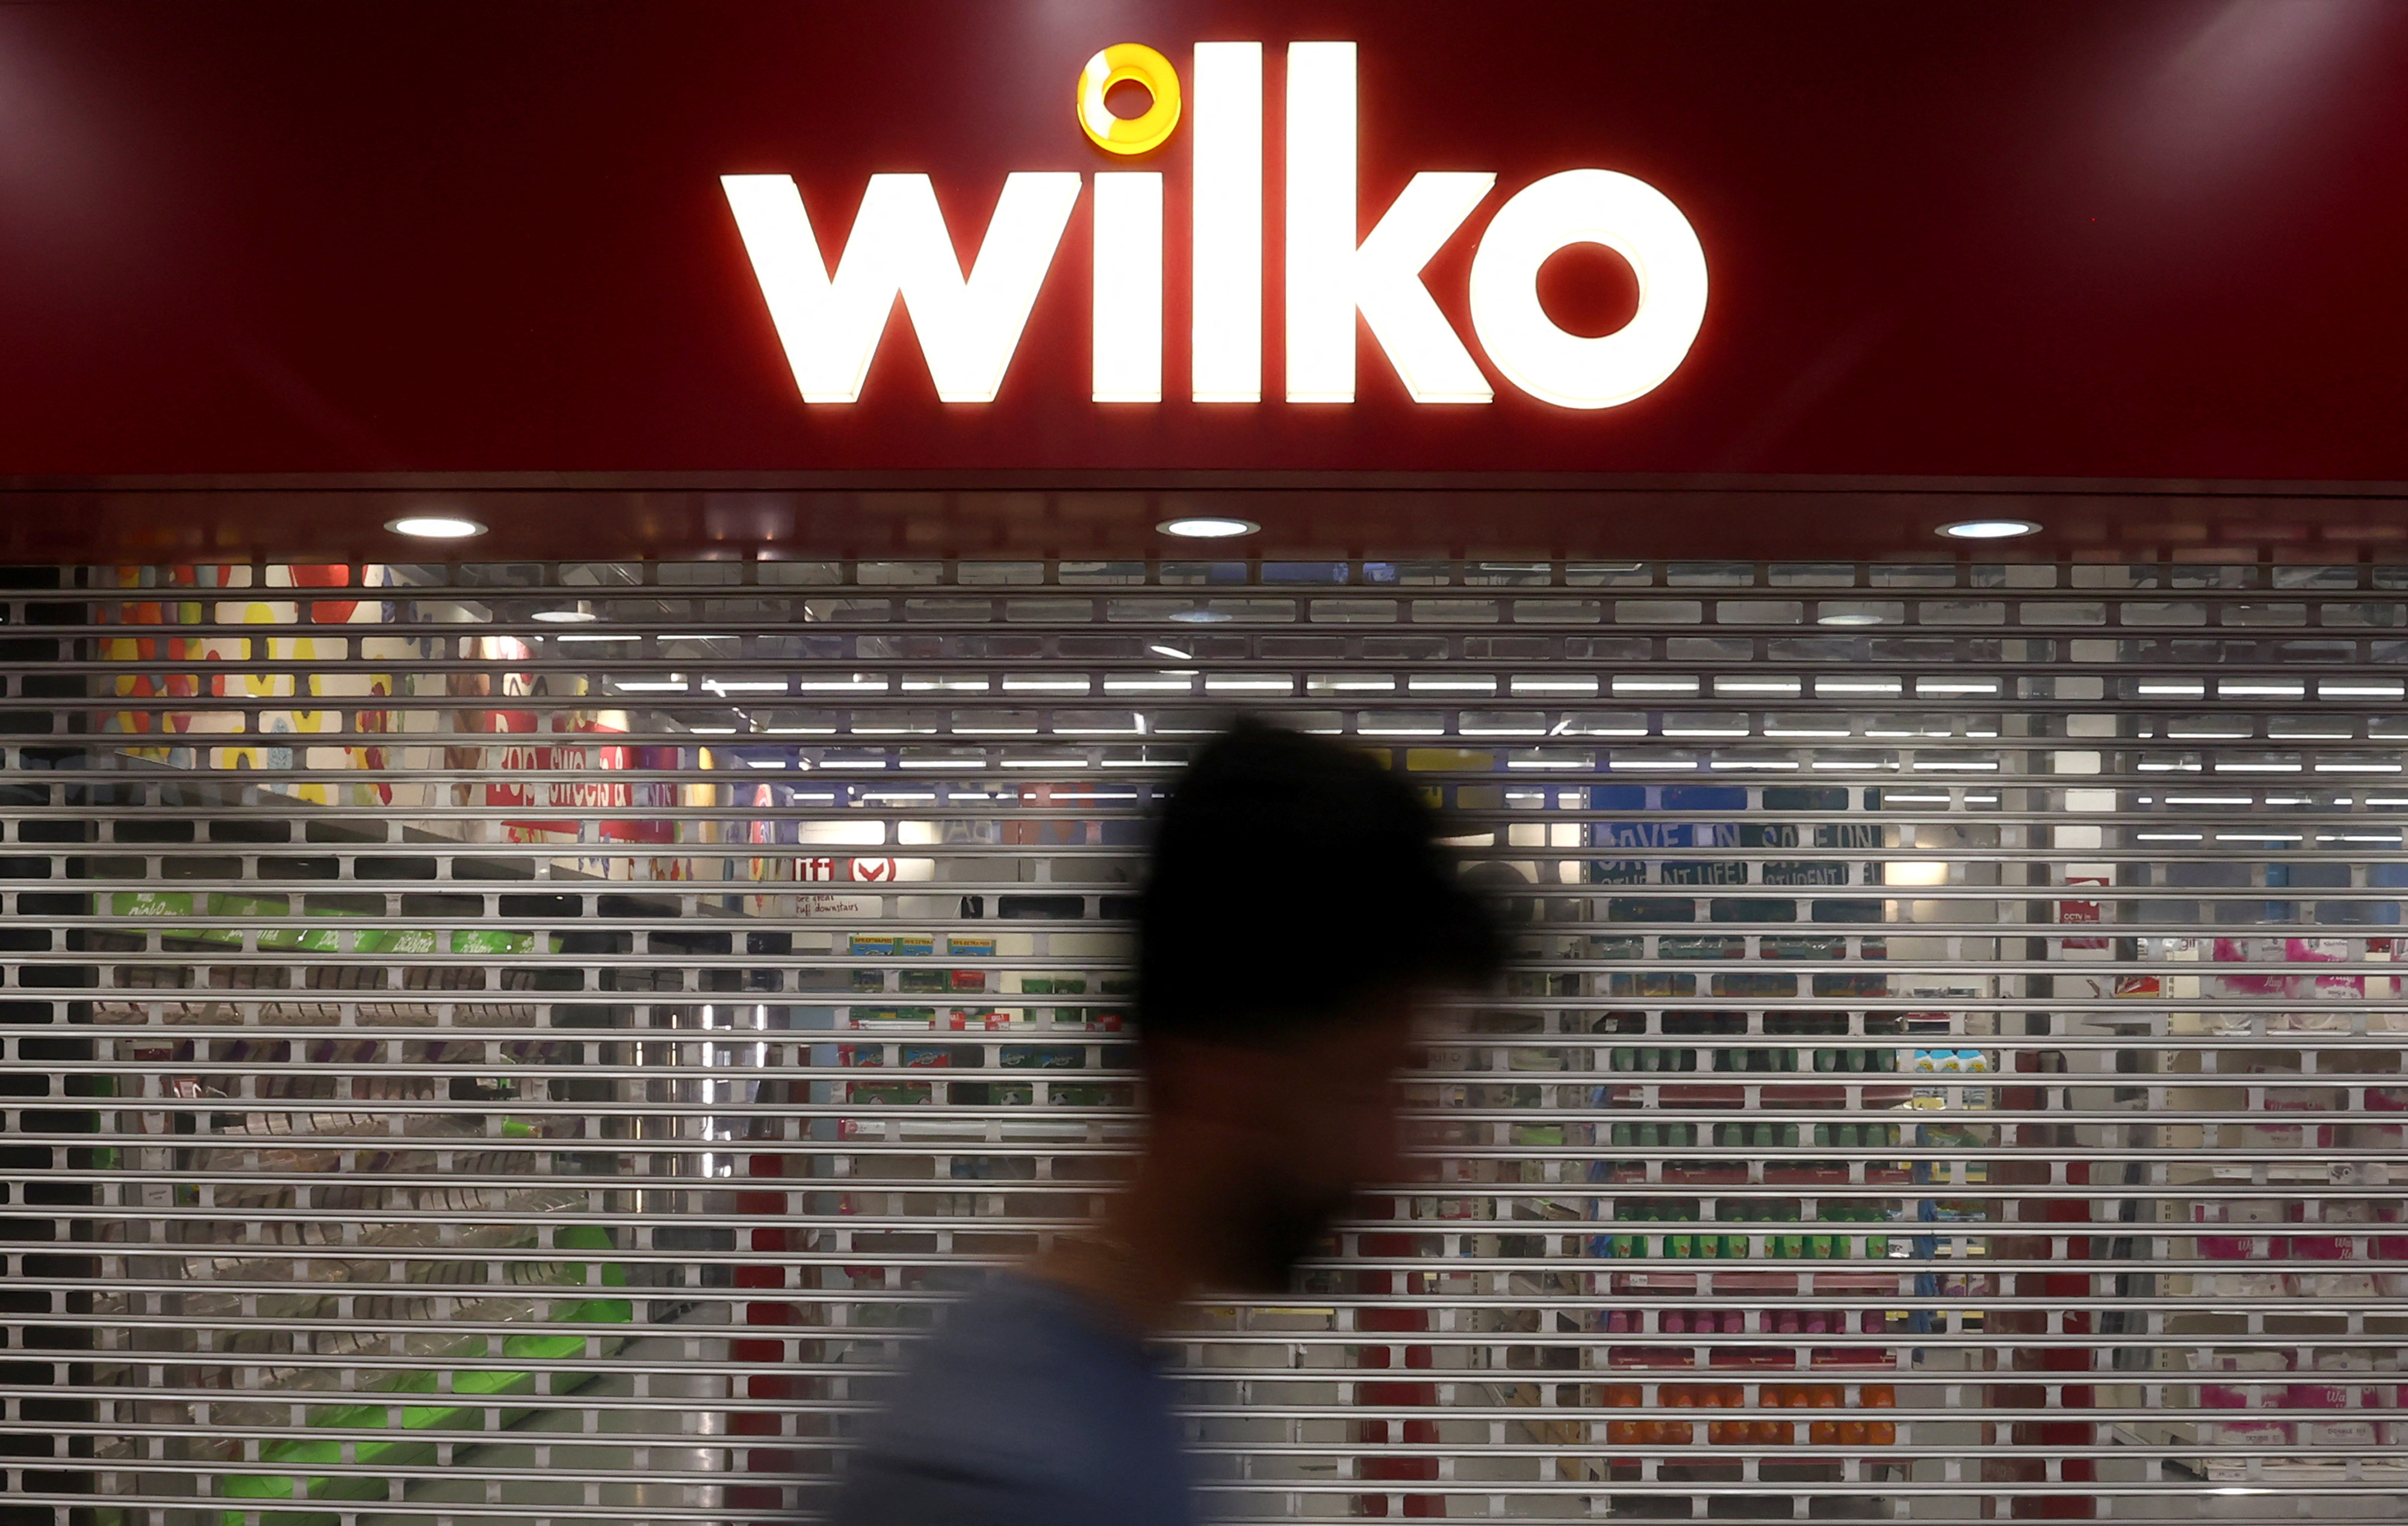 A branch of the discount retail homeware store Wilko is seen in London